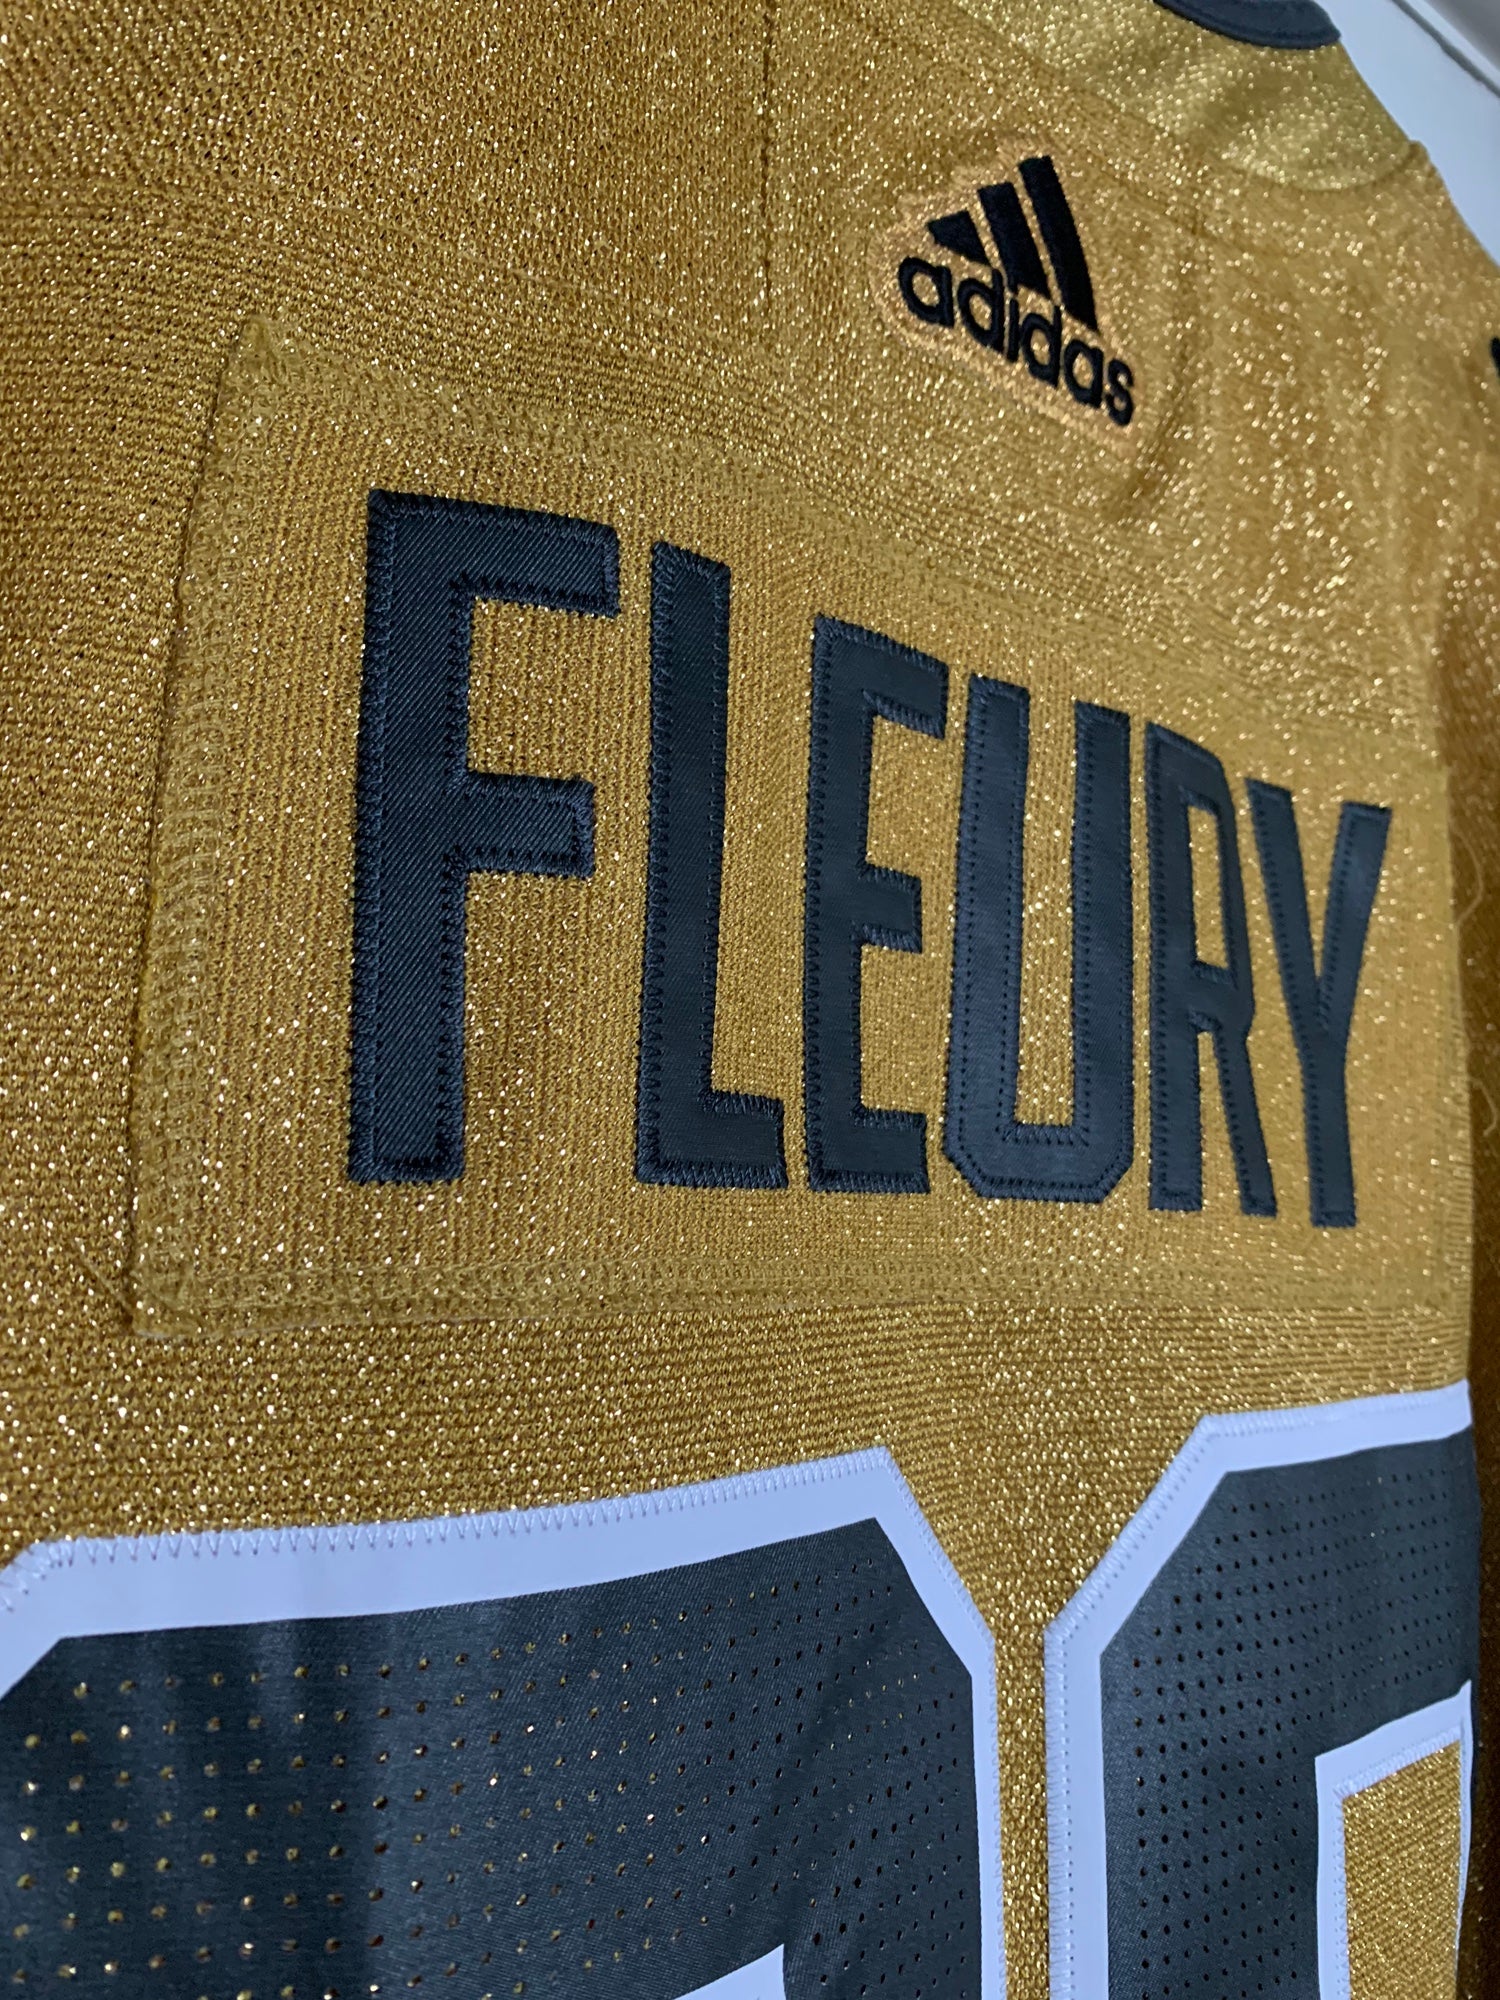 Marc-Andre Fleury Vegas Golden Knights Jersey GOAT - Marc Andre